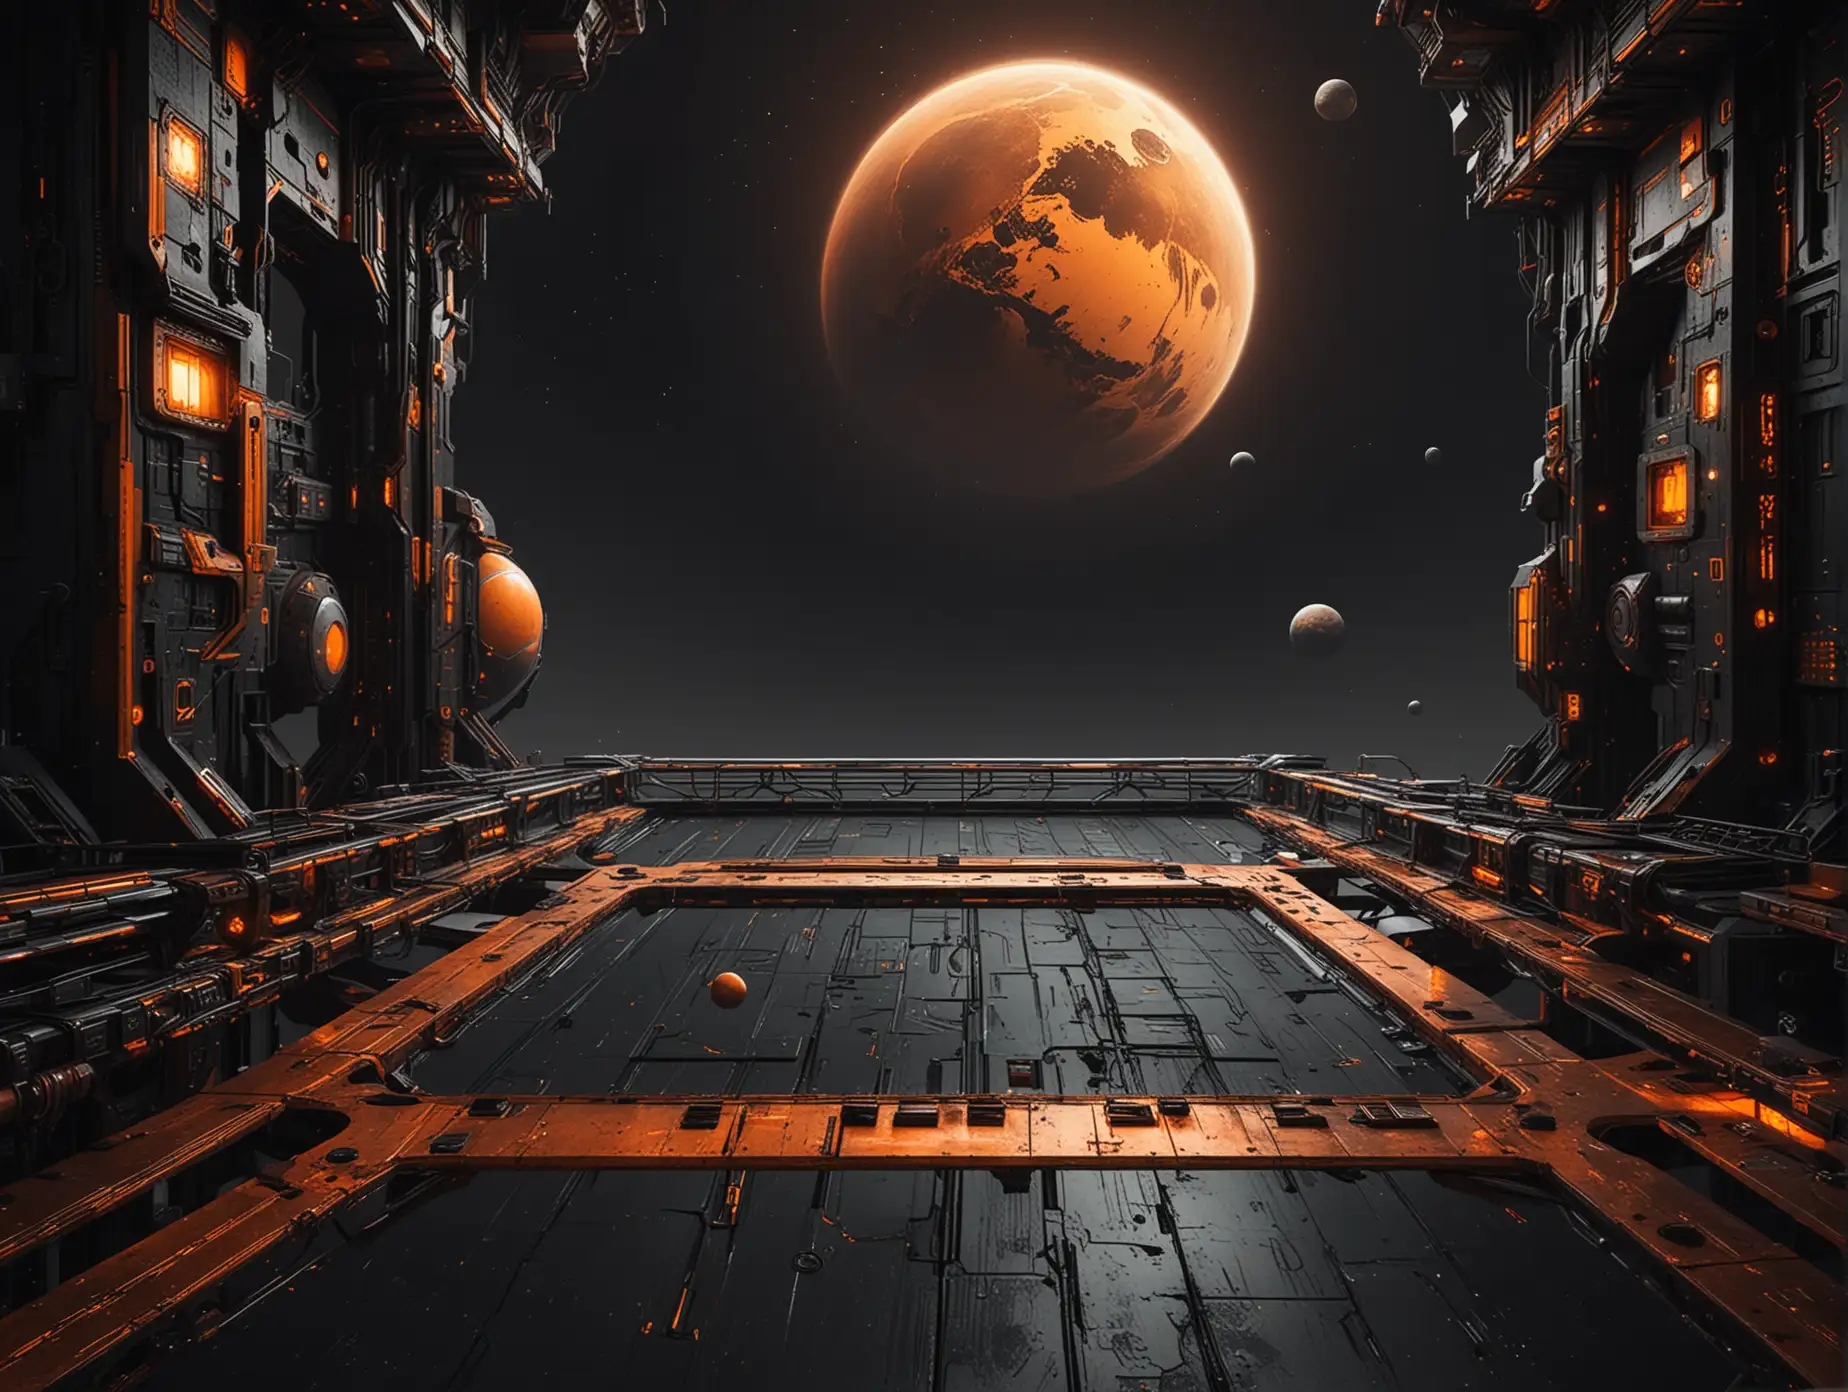 Dark-Futuristic-Place-with-Platform-and-Planet-View-in-Orange-and-Metallic-Tones